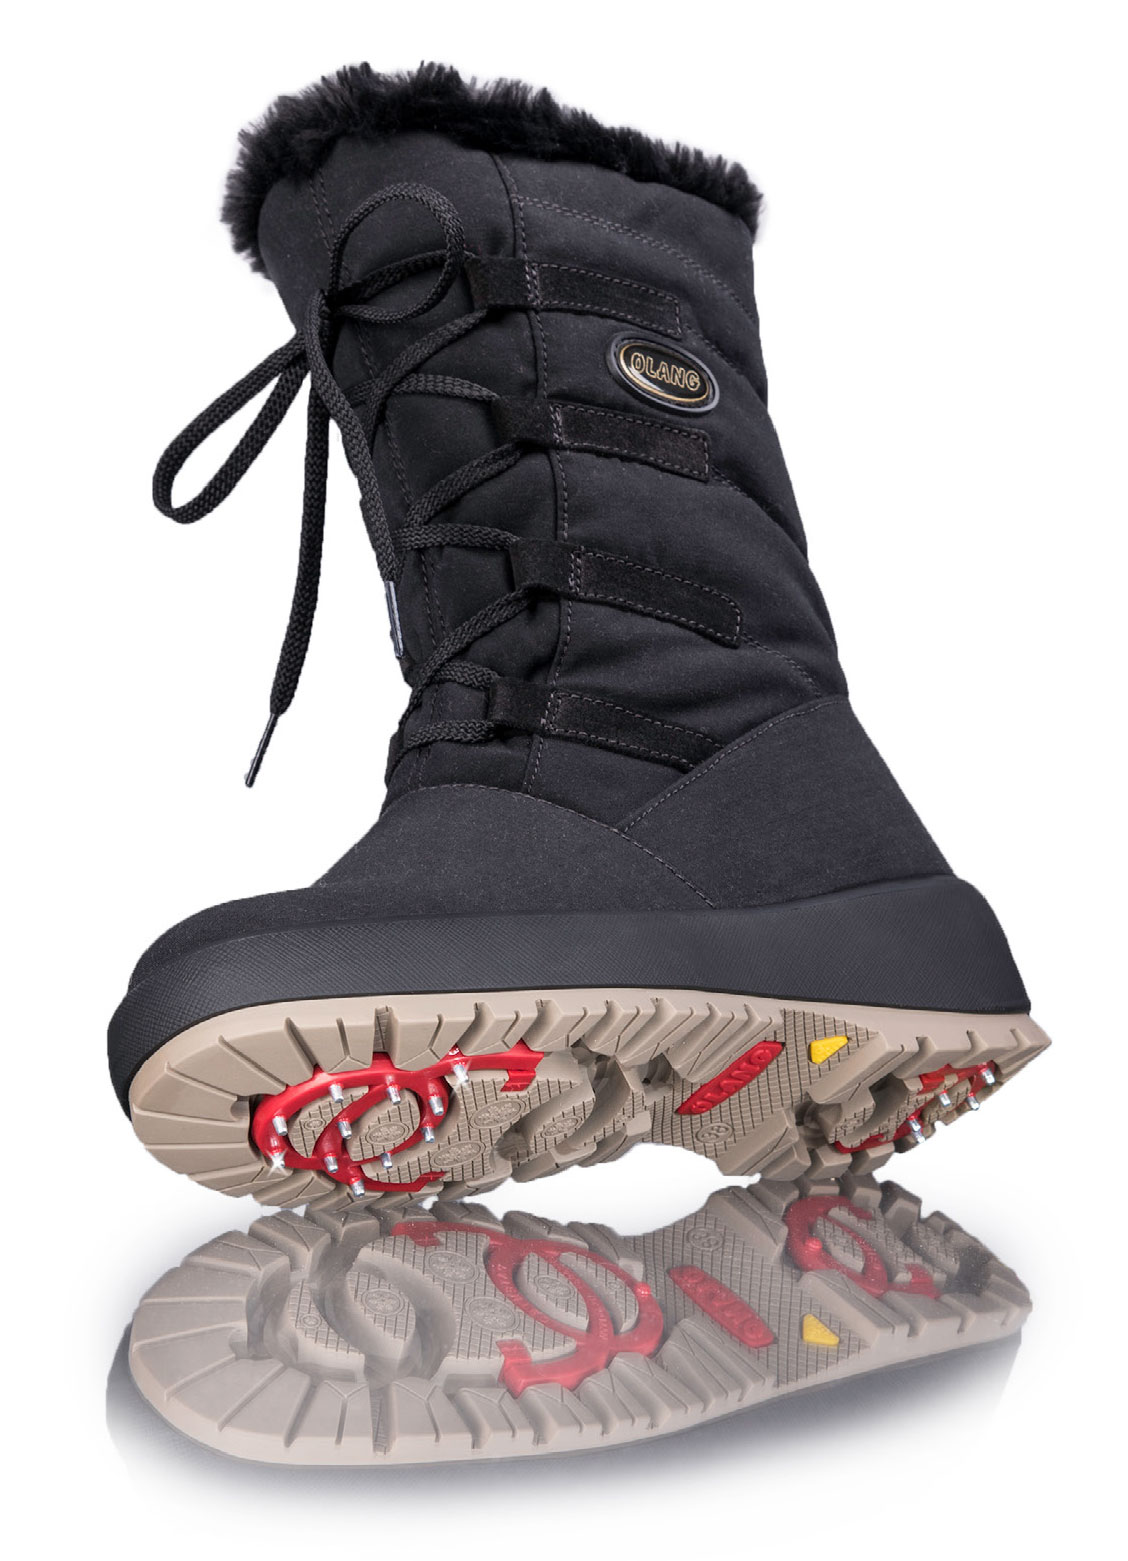 pajar boots with crampons